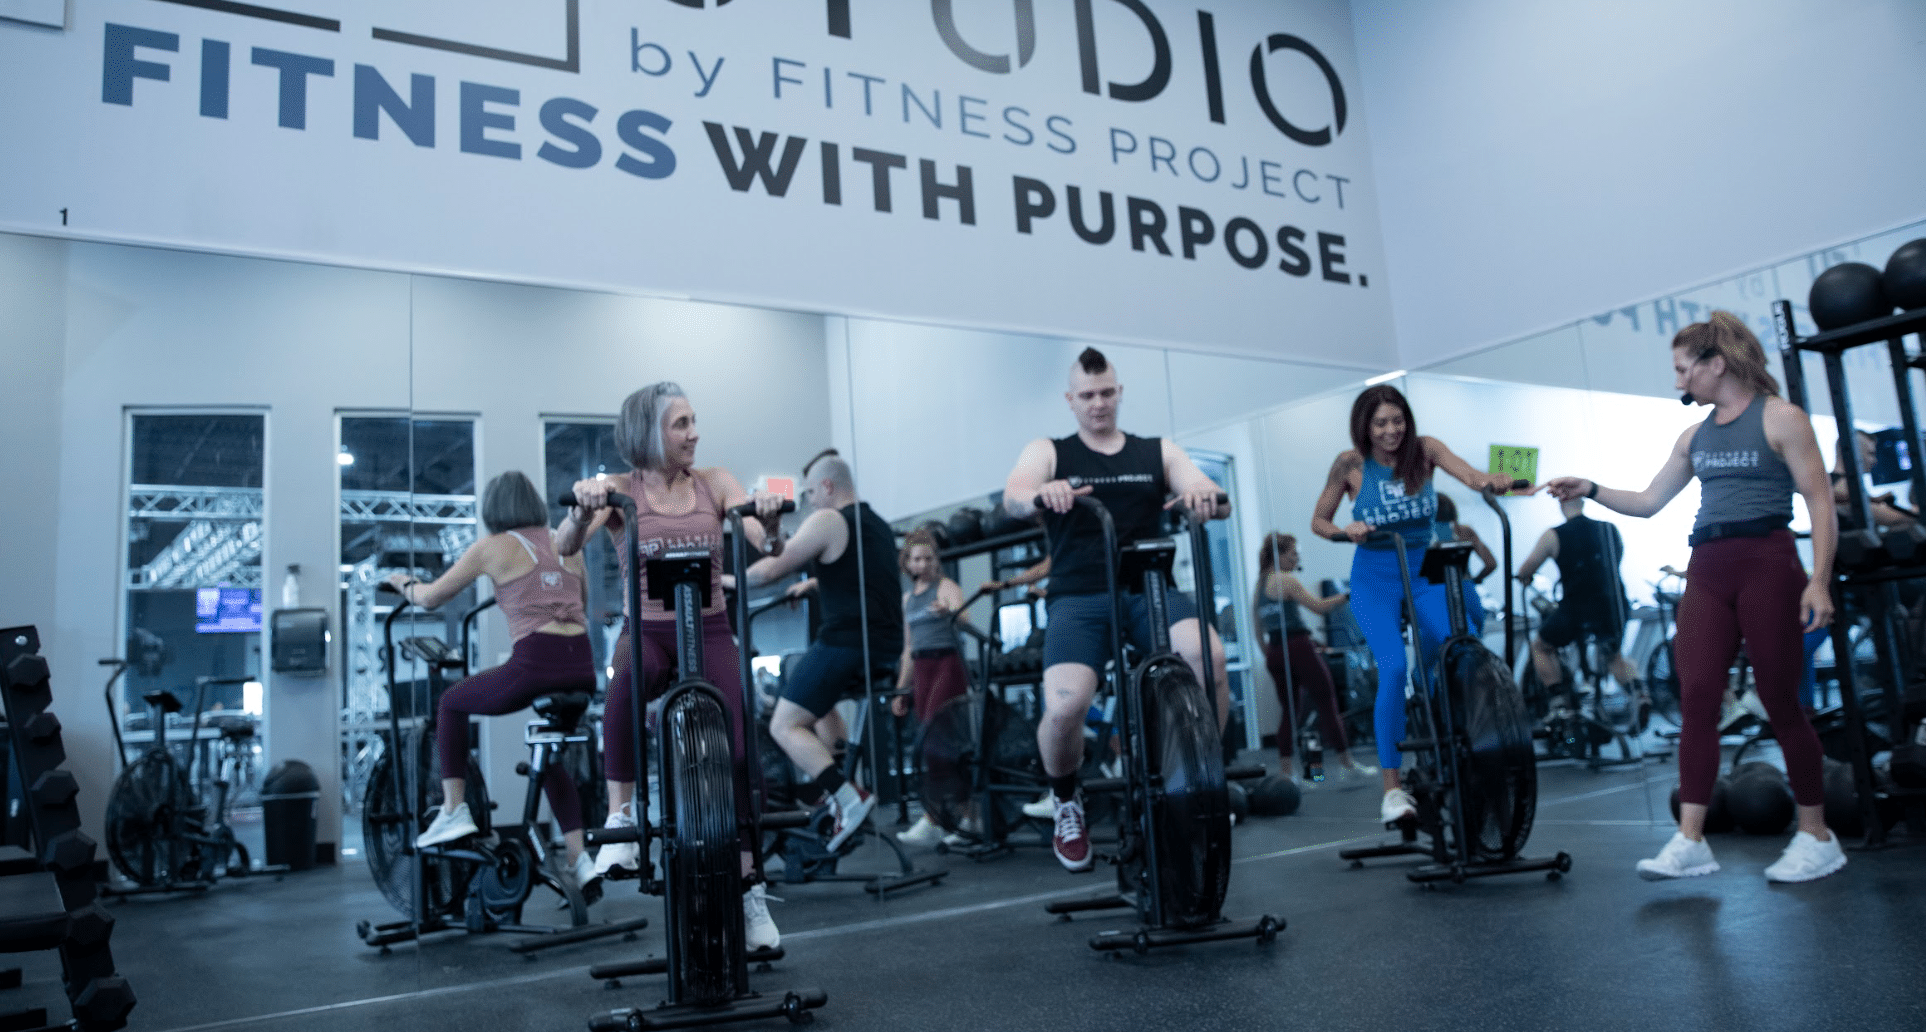 LEVEL UP YOUR FITNESS WITH STUDIO FITNESS - Fitness Project